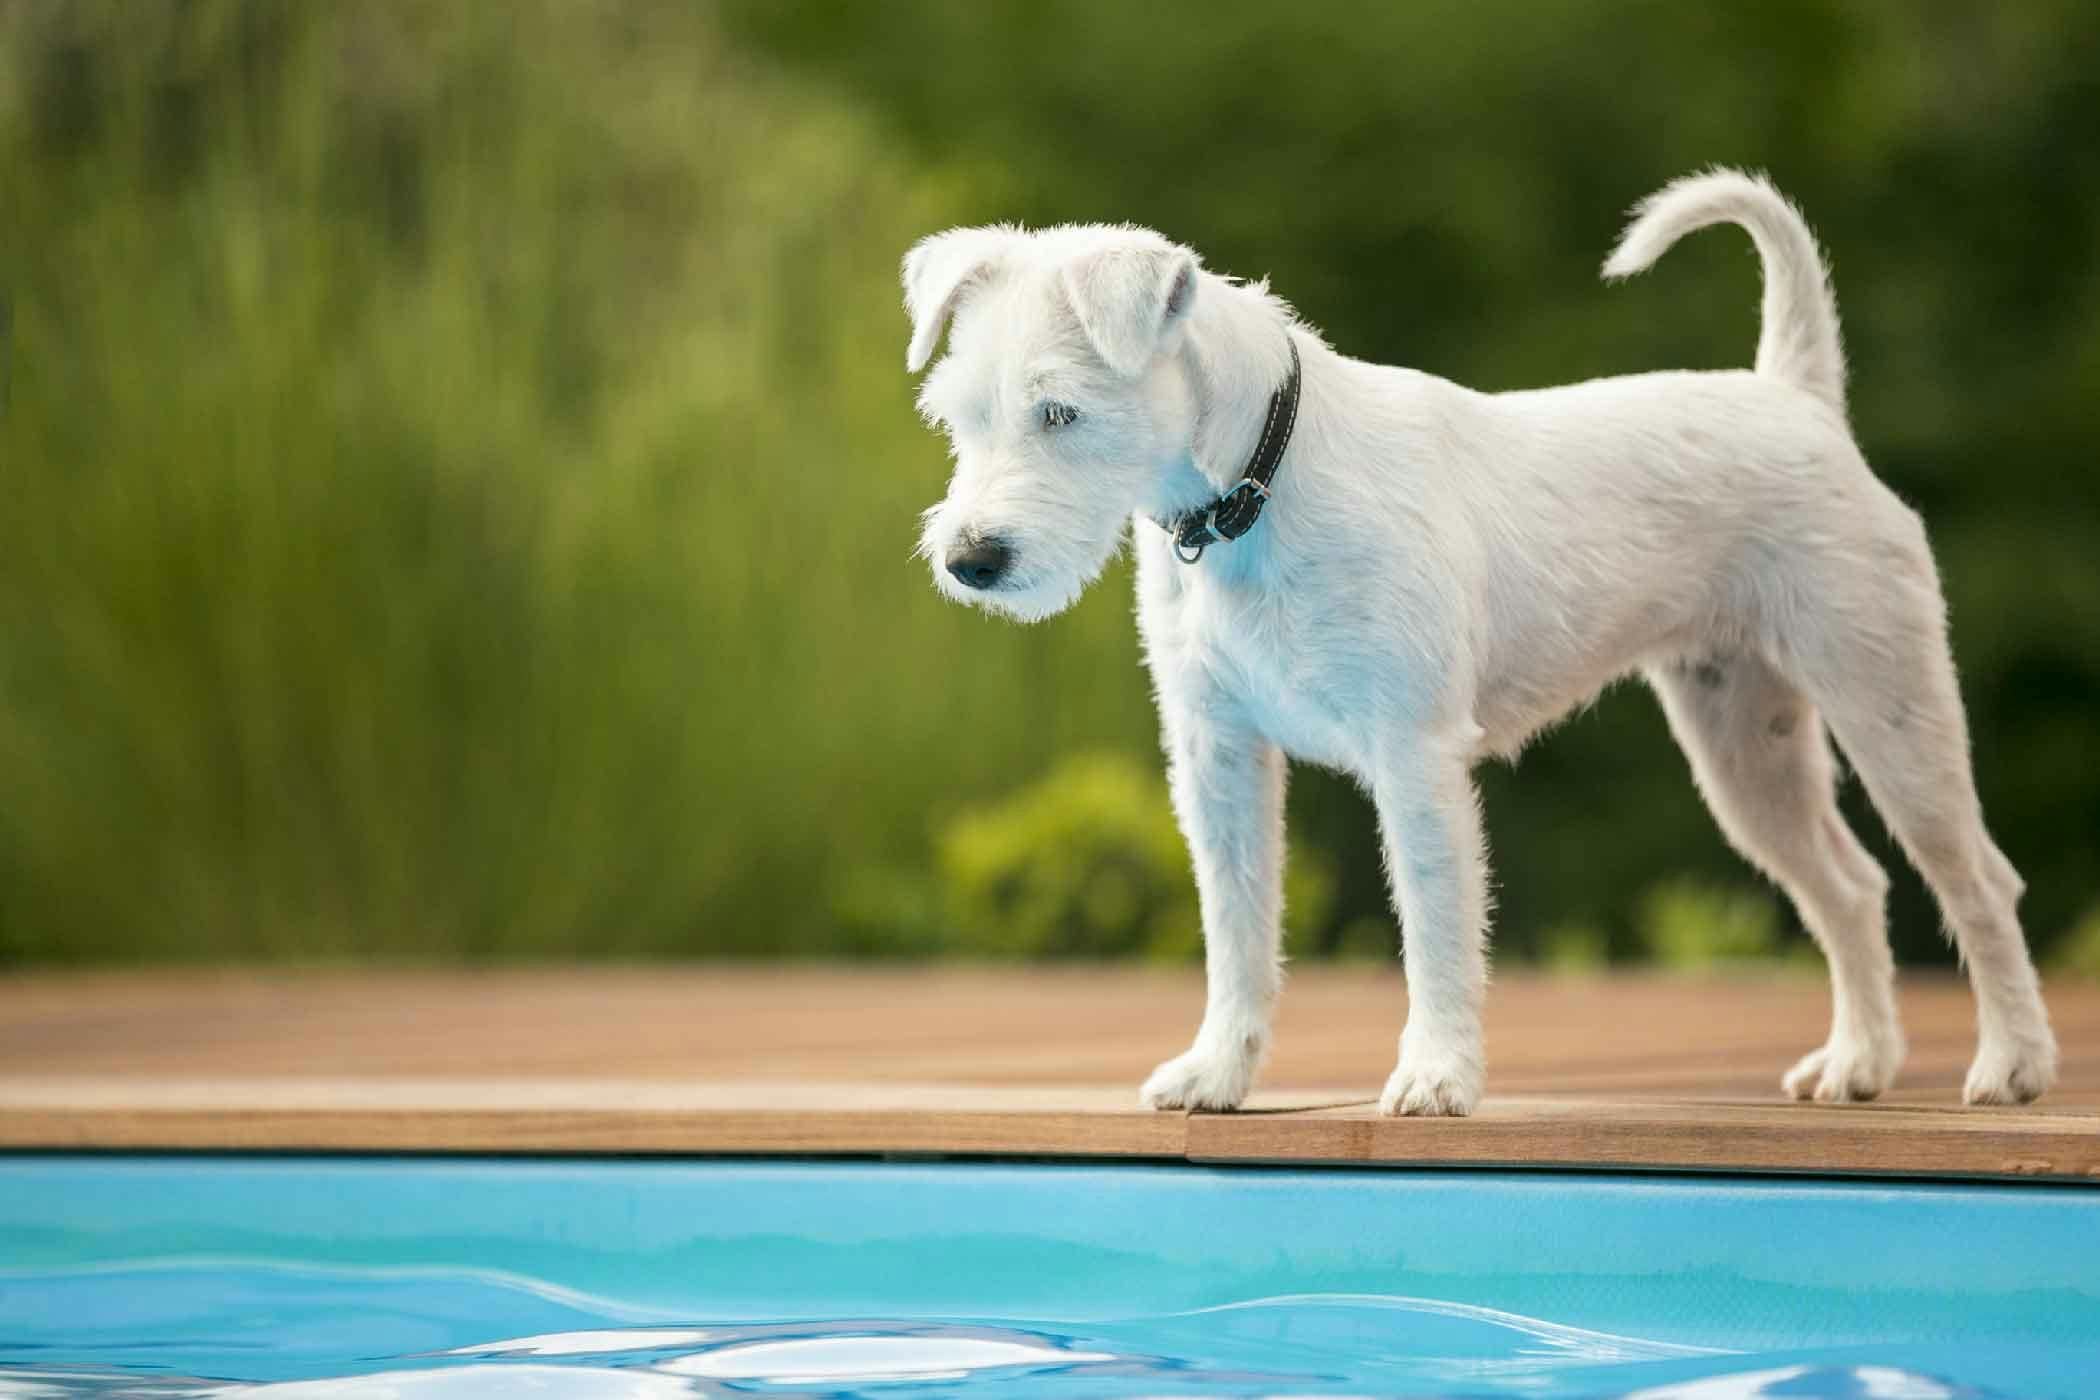 do dogs pee in swimming pools